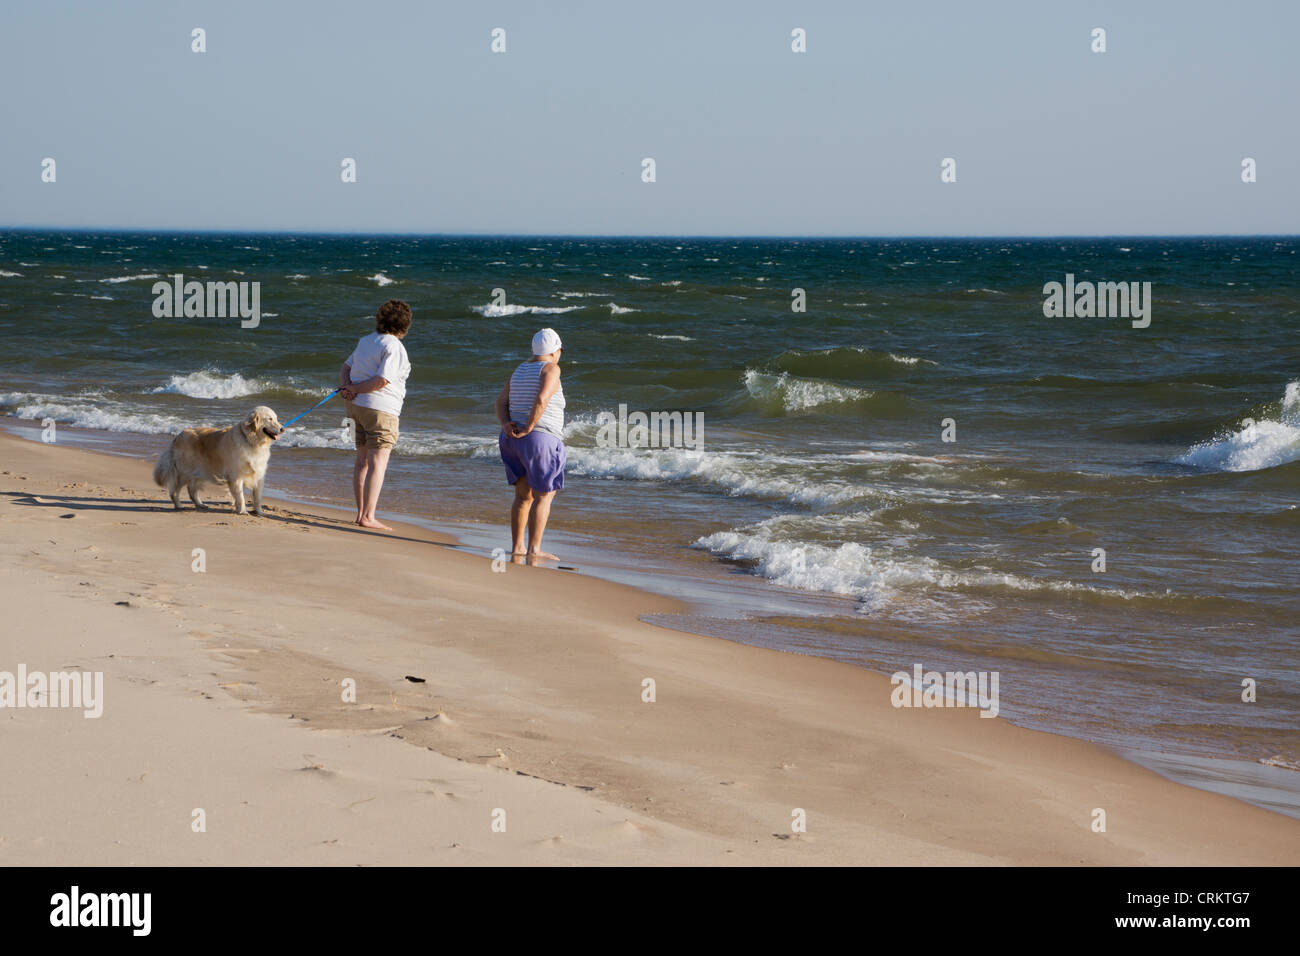 Two elderly women and their dog watch waves roll in from Lake Michigan. Stock Photo